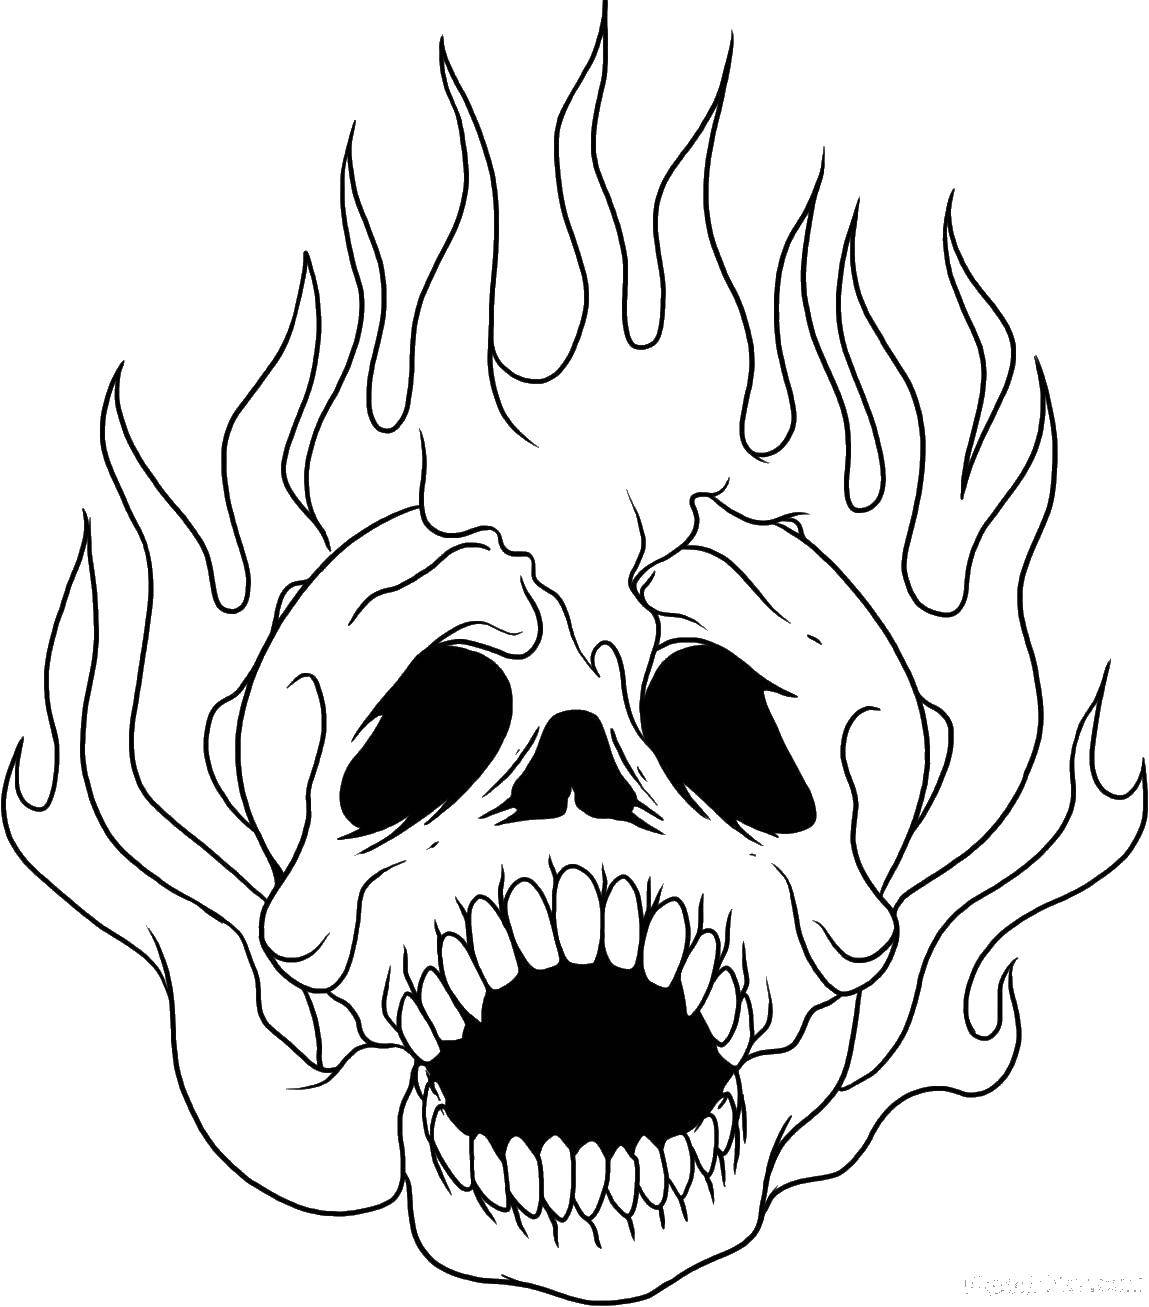 Coloring Skull covered in flames. Category Skull. Tags:  Skull, fire.